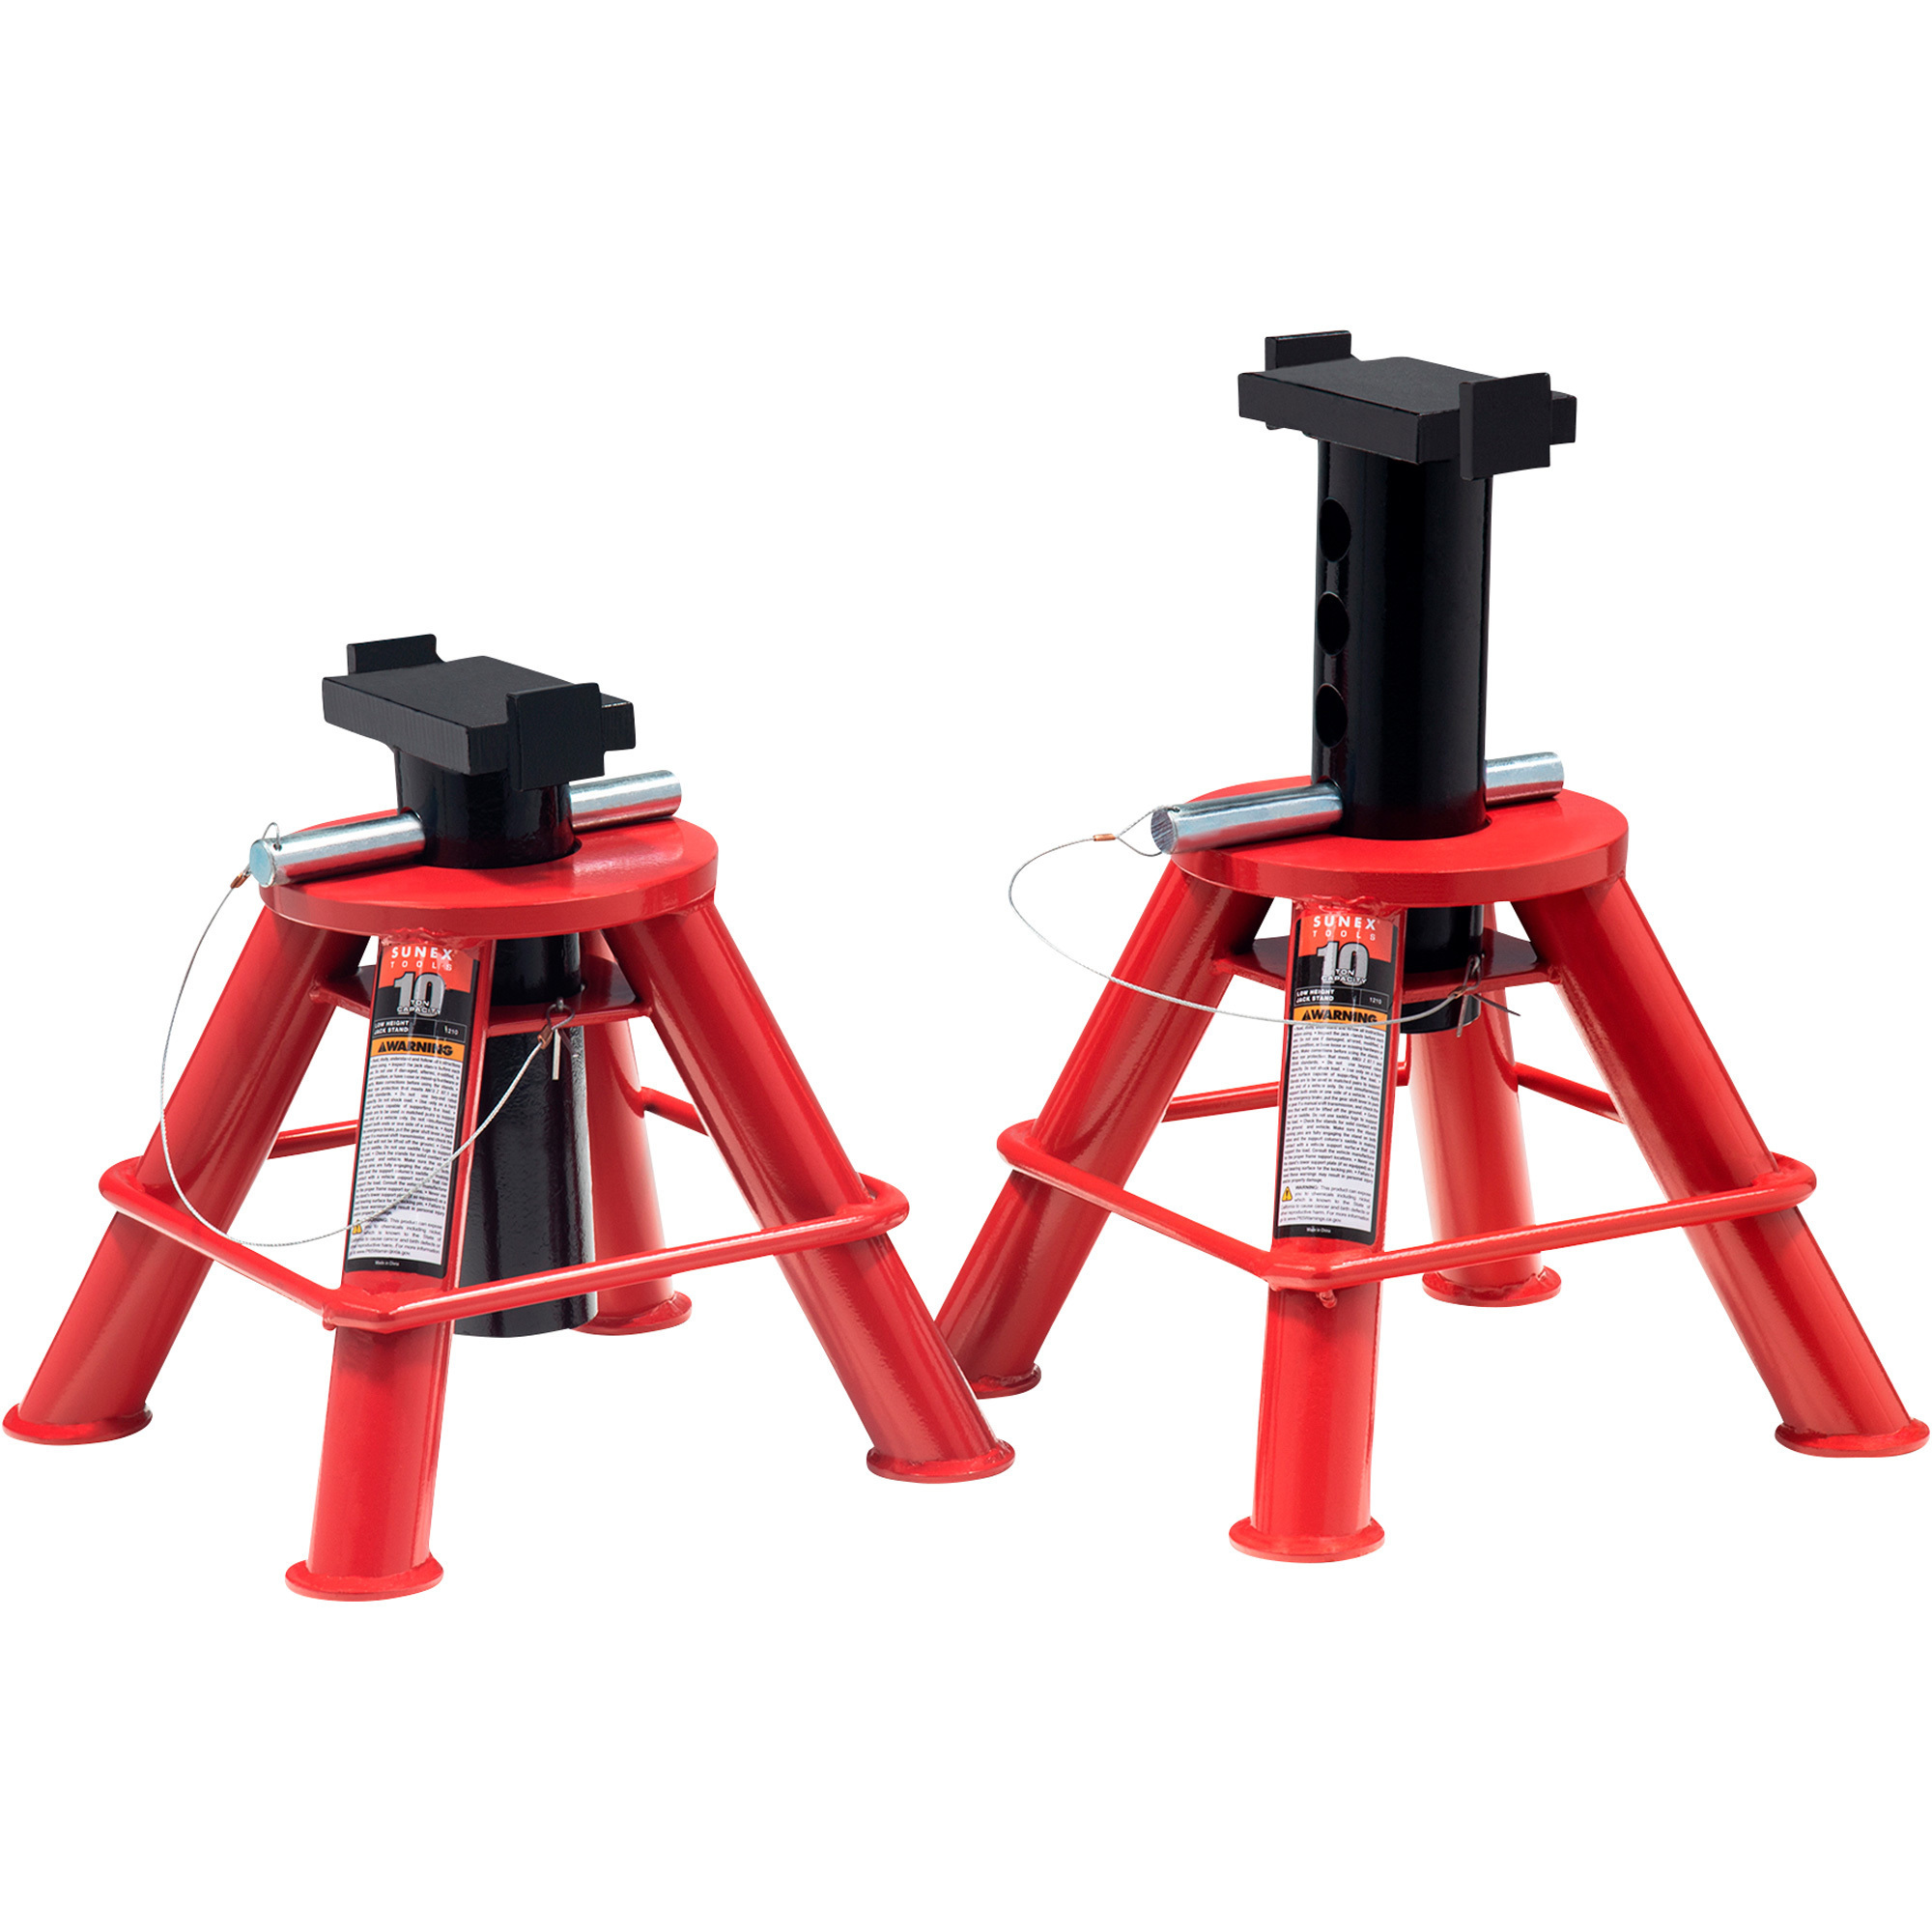 Sunex Low-Height 10-Ton Jack Stands, Model 1210